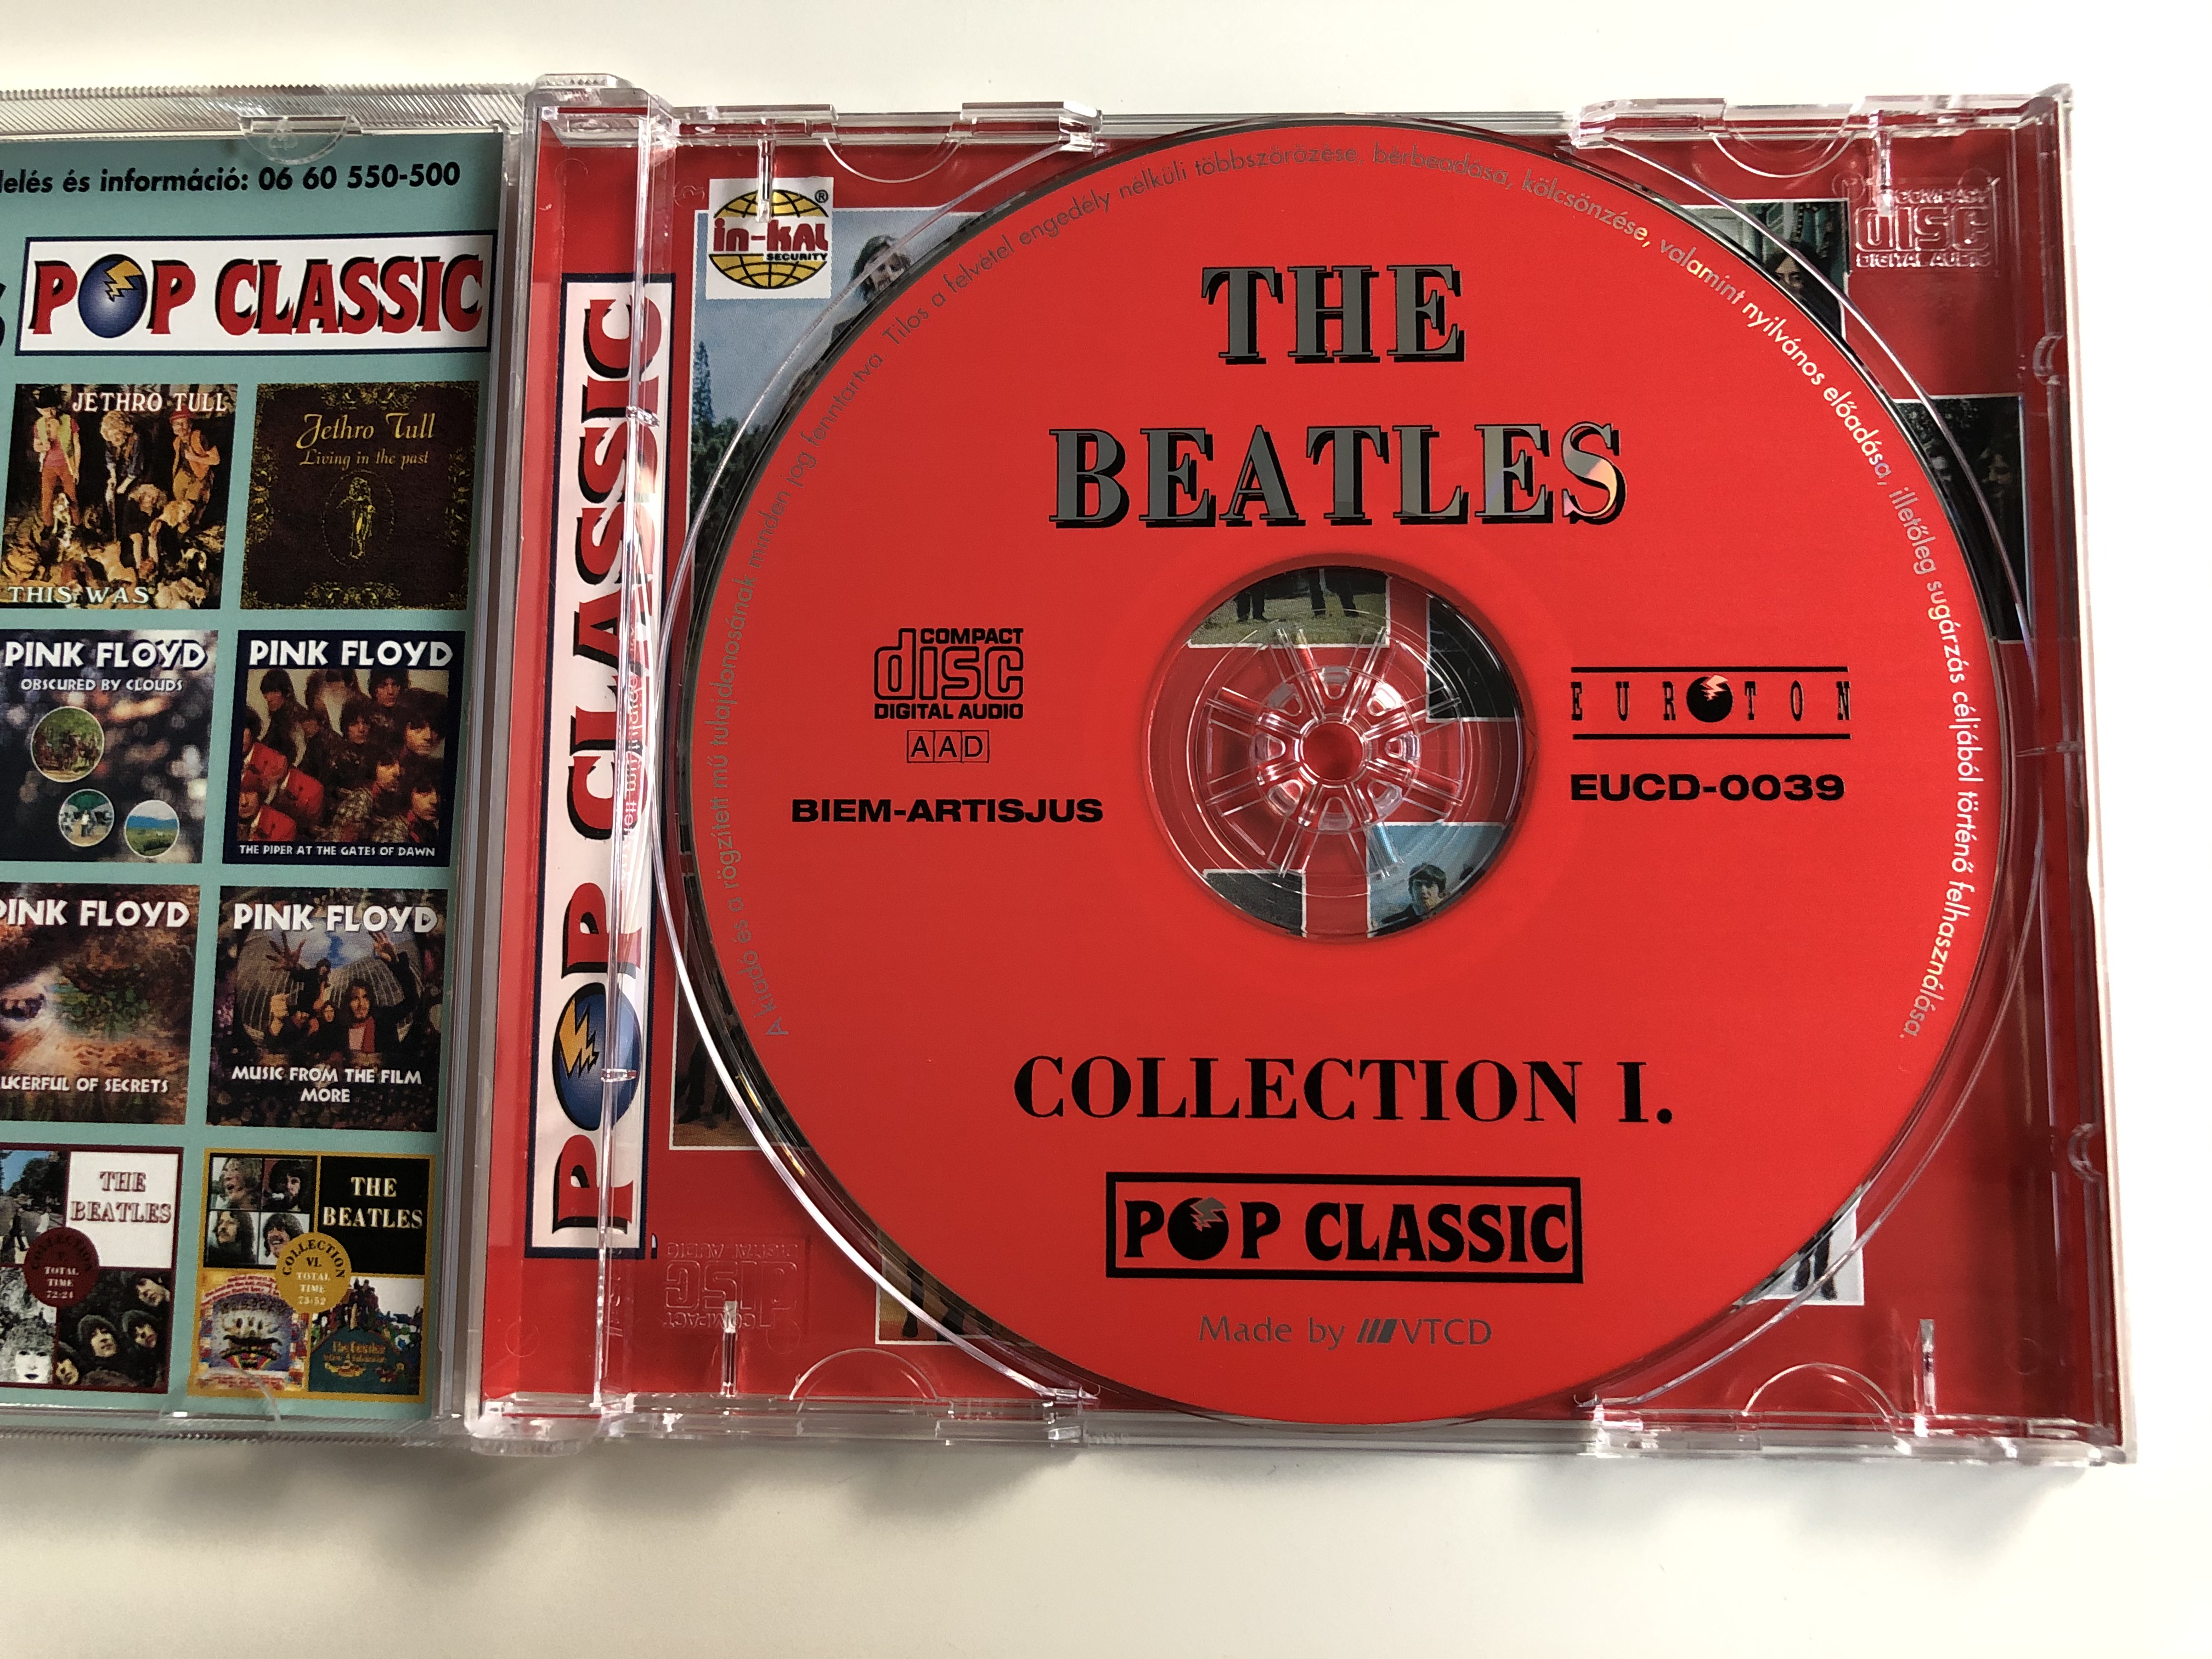 the-beatles-collection-i.-total-timr-7315-pop-classic-euroton-audio-cd-eucd-0039-2-.jpg